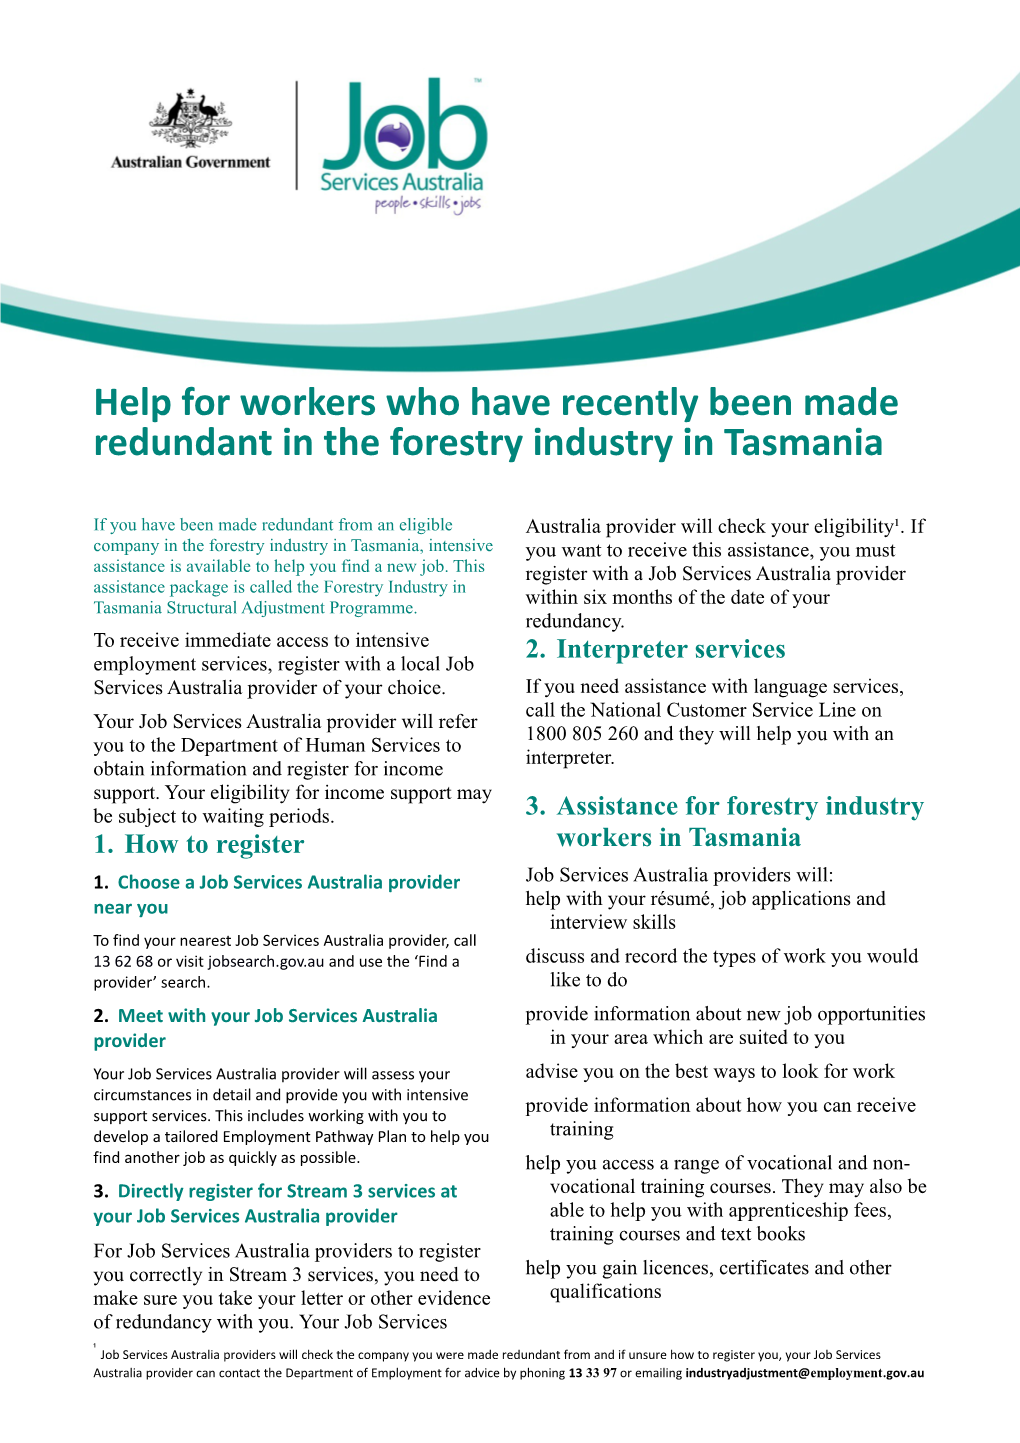 Help for Workers Who Have Recently Been Made Redundant in the Forestry Industry in Tasmania